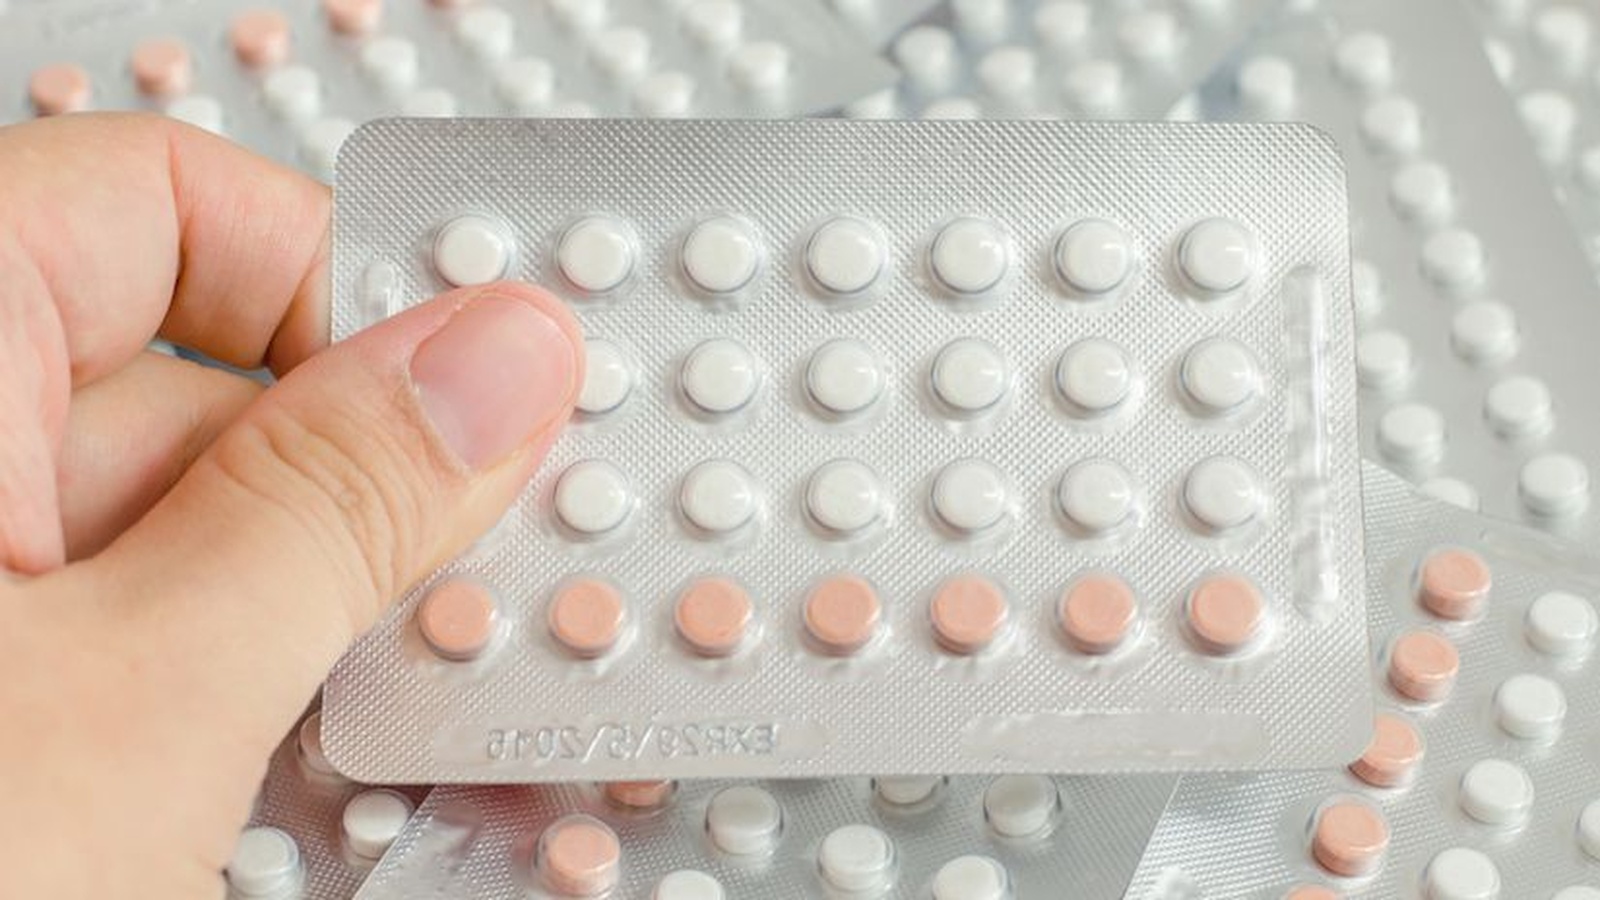 What Every Woman Should Know About The Pill